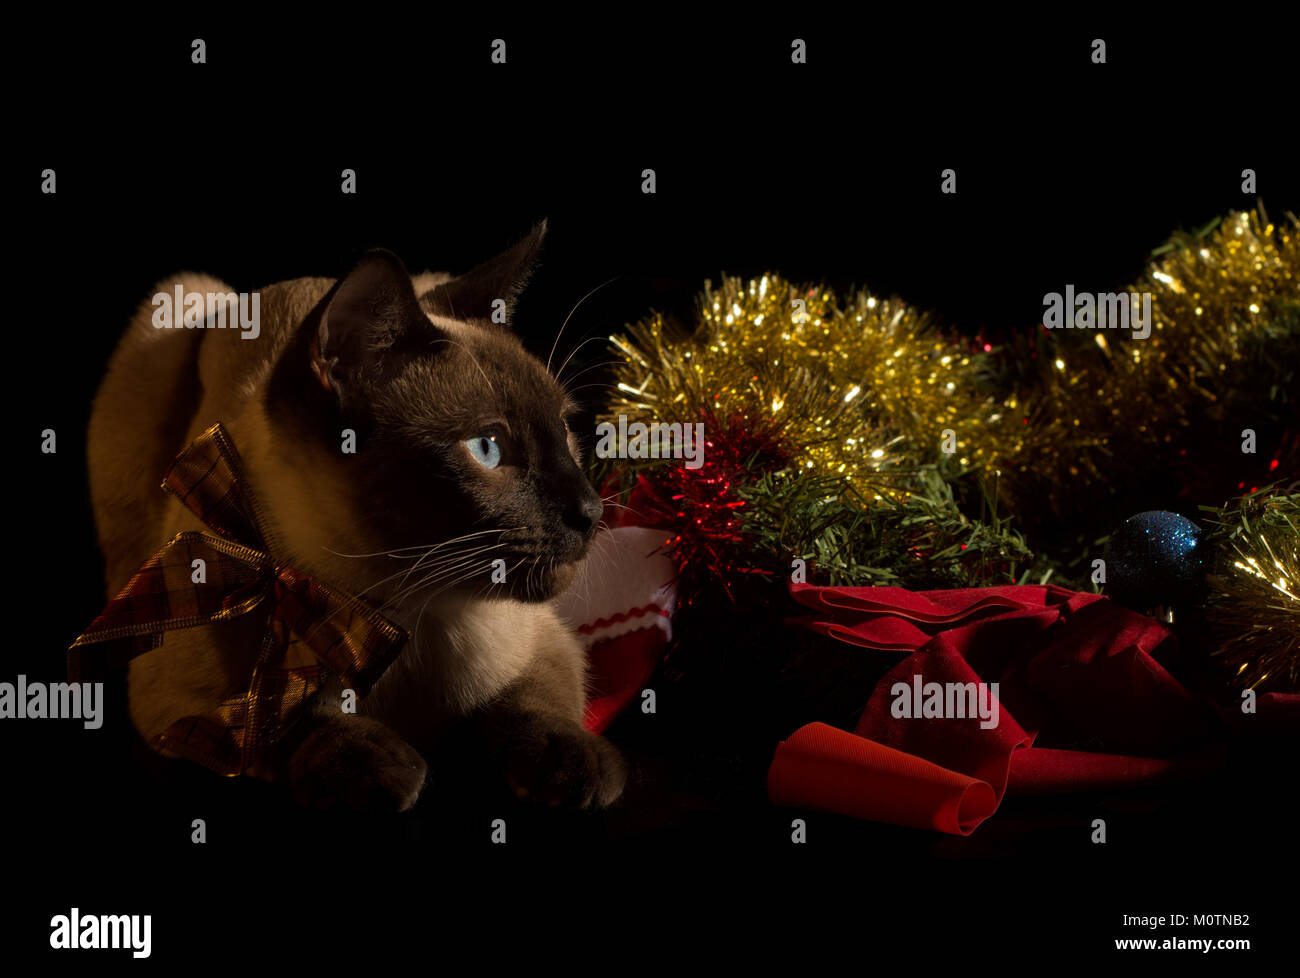 Siamese cat with golden Christmas tinsel and baubles, on black background with dramatic lighting Stock Photo